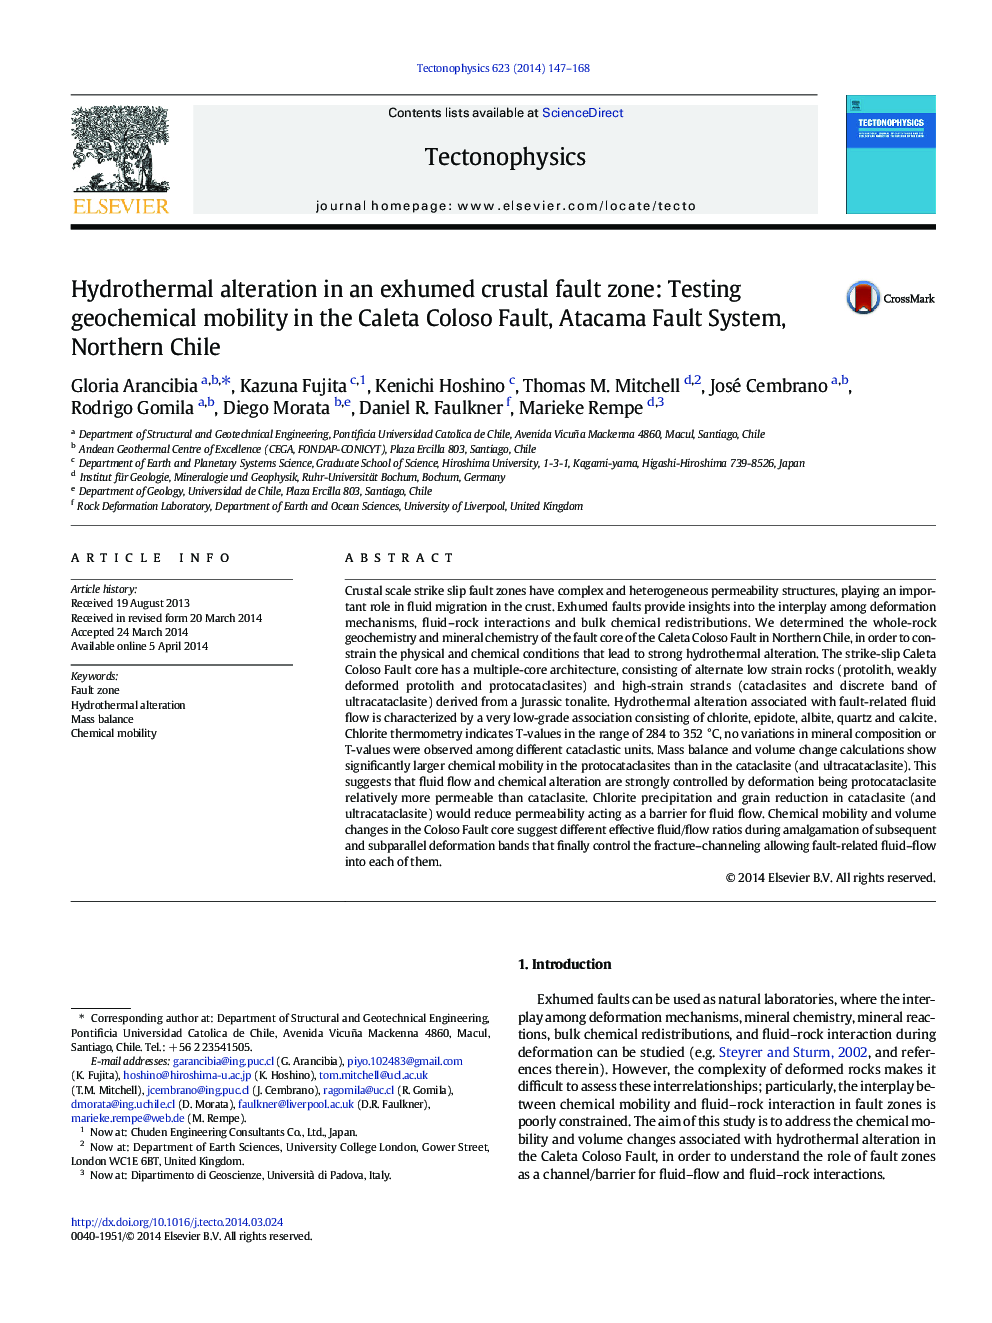 Hydrothermal alteration in an exhumed crustal fault zone: Testing geochemical mobility in the Caleta Coloso Fault, Atacama Fault System, Northern Chile